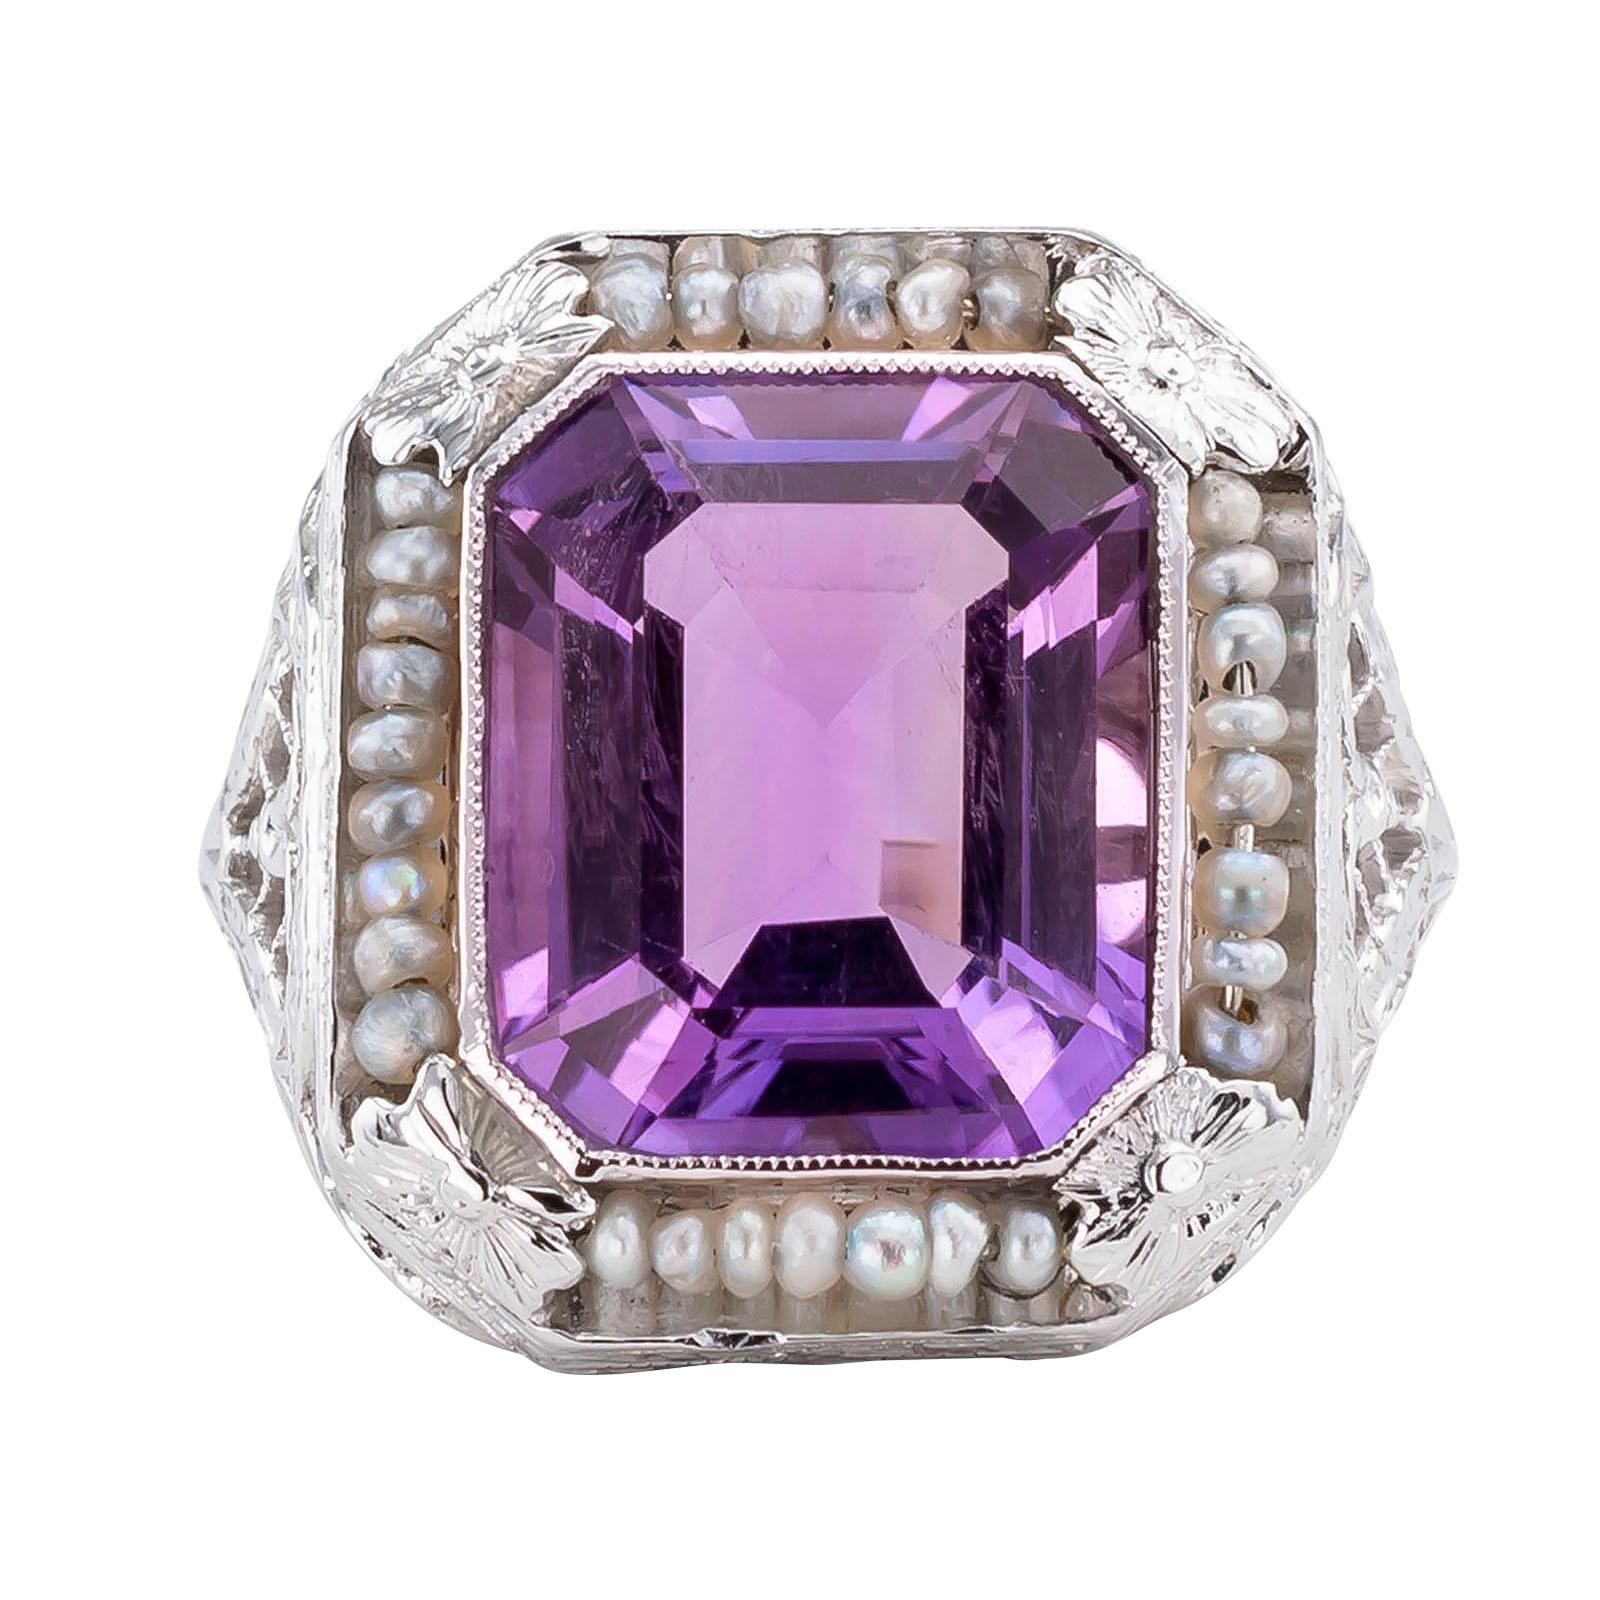 Art Deco amethyst seed pearl and white gold filigree ring circa 1930.

DETAILS:
GEMSTONES:  one emerald-cut amethyst and seed pearls.

METAL:  18-karat white gold

MEASUREMENTS:   Approximately 11/16” (17 1/4 mm) wide vertical to the